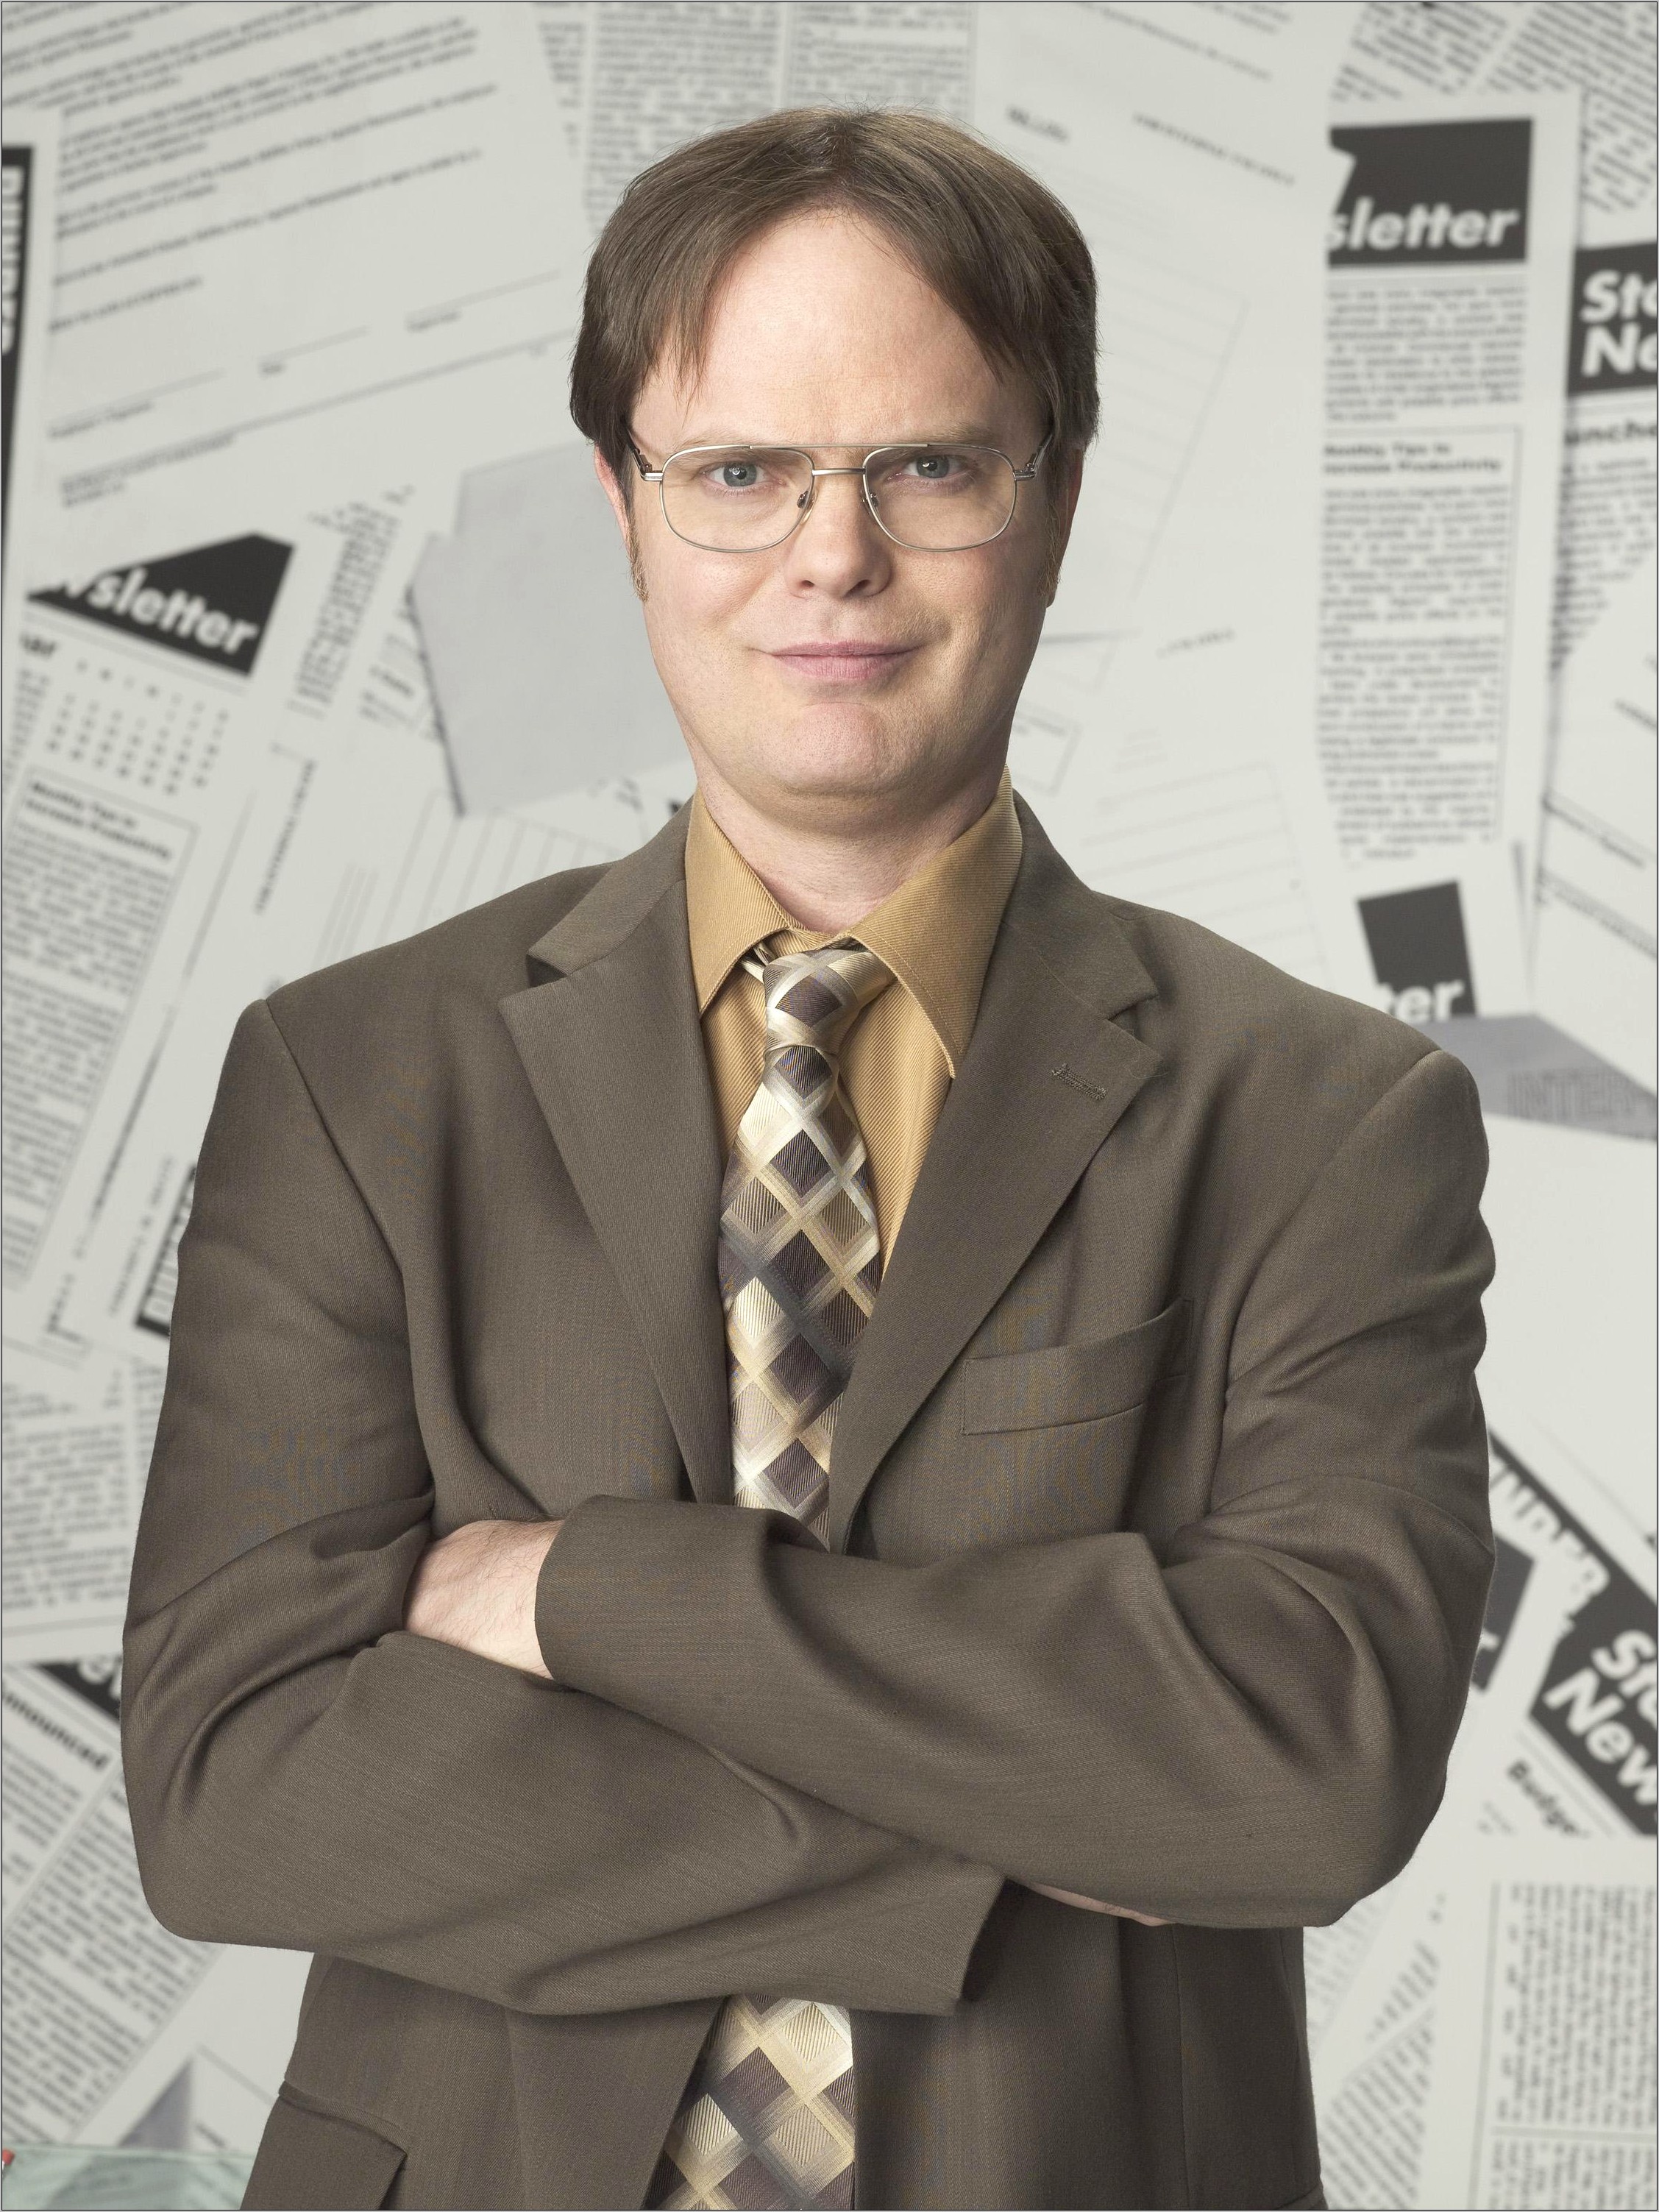 Dwight Schrute Special Skills Resume